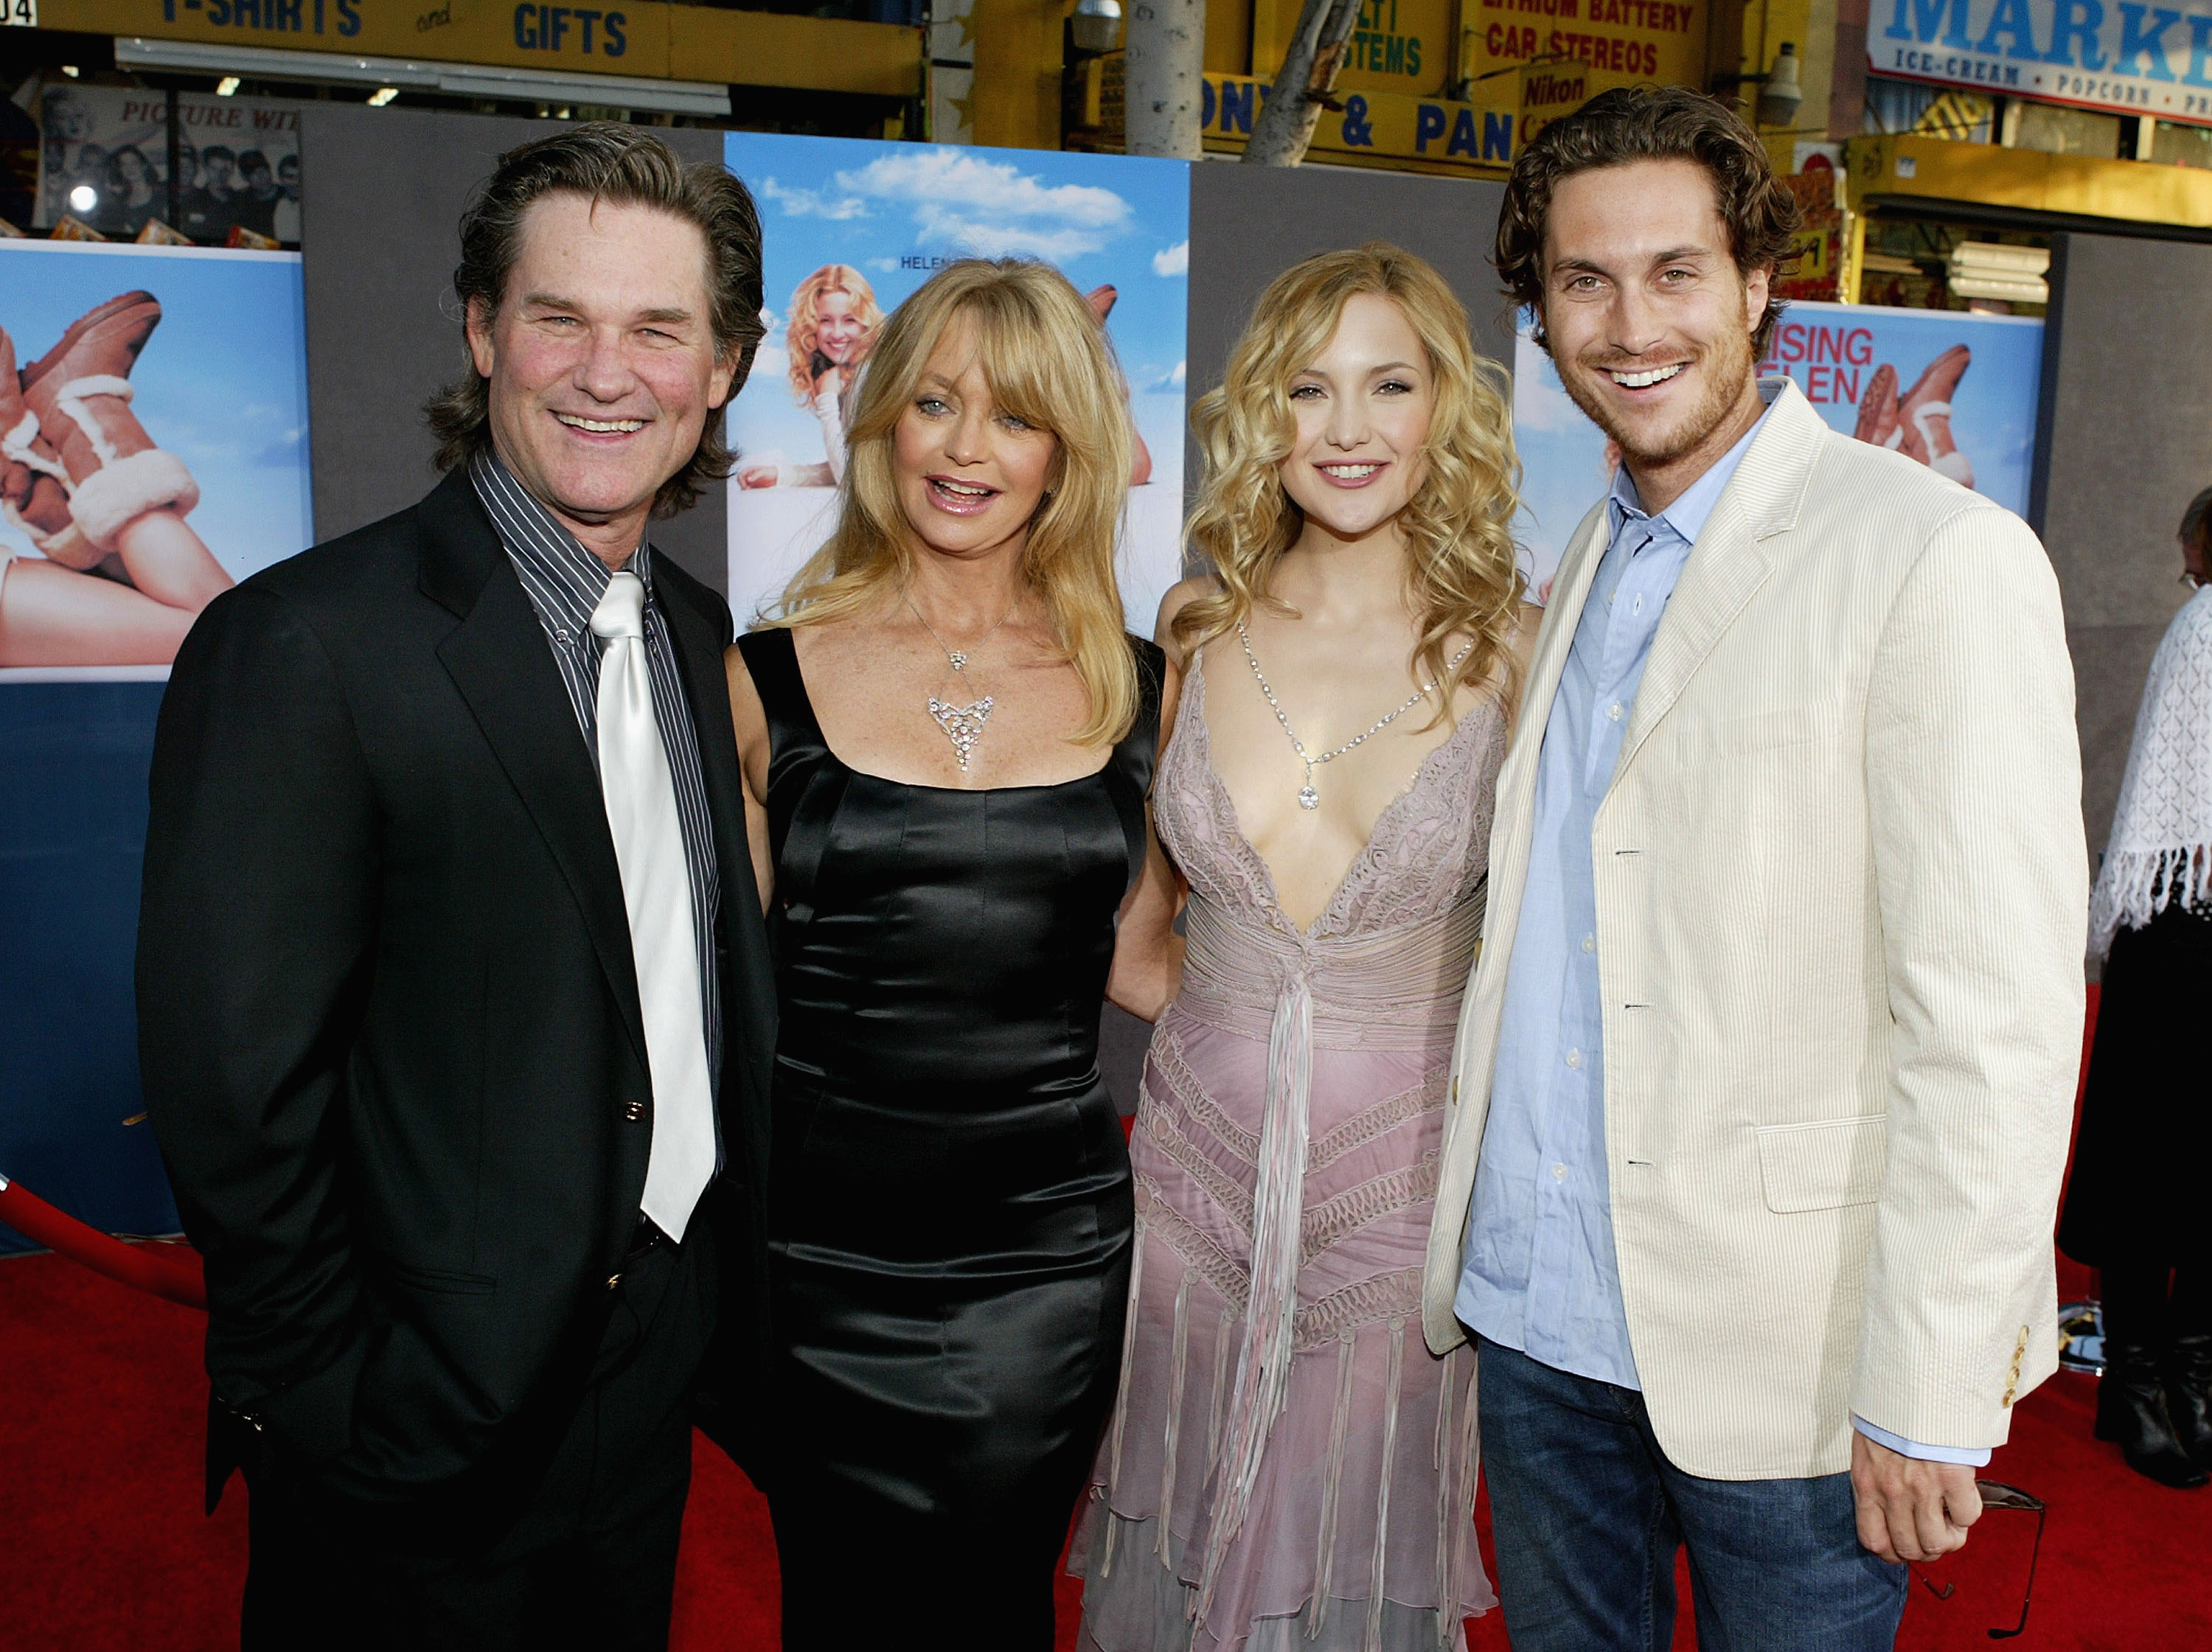 Kurt Russell, Goldie Hawn, Kate Hudson and Oliver Hudson at the premiere of "Raising Helen" in Hollywood, California on May 26, 2004 | Source: Getty Images